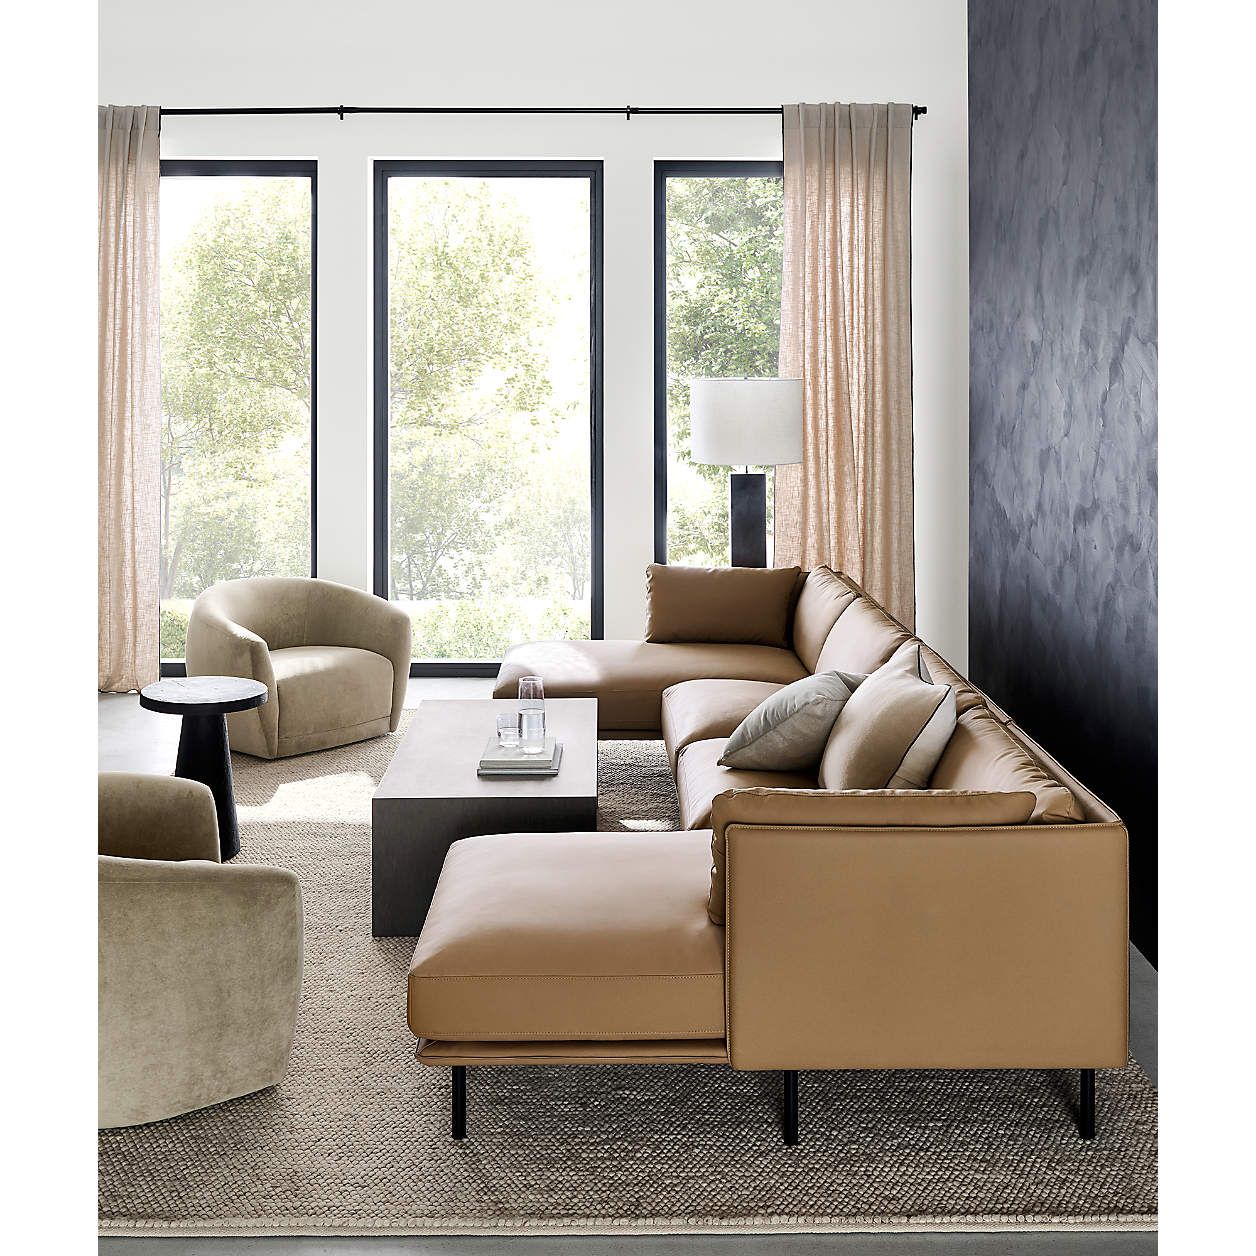 Ultimate Elegance: Faux Leather Sectional Sofas for Your Home